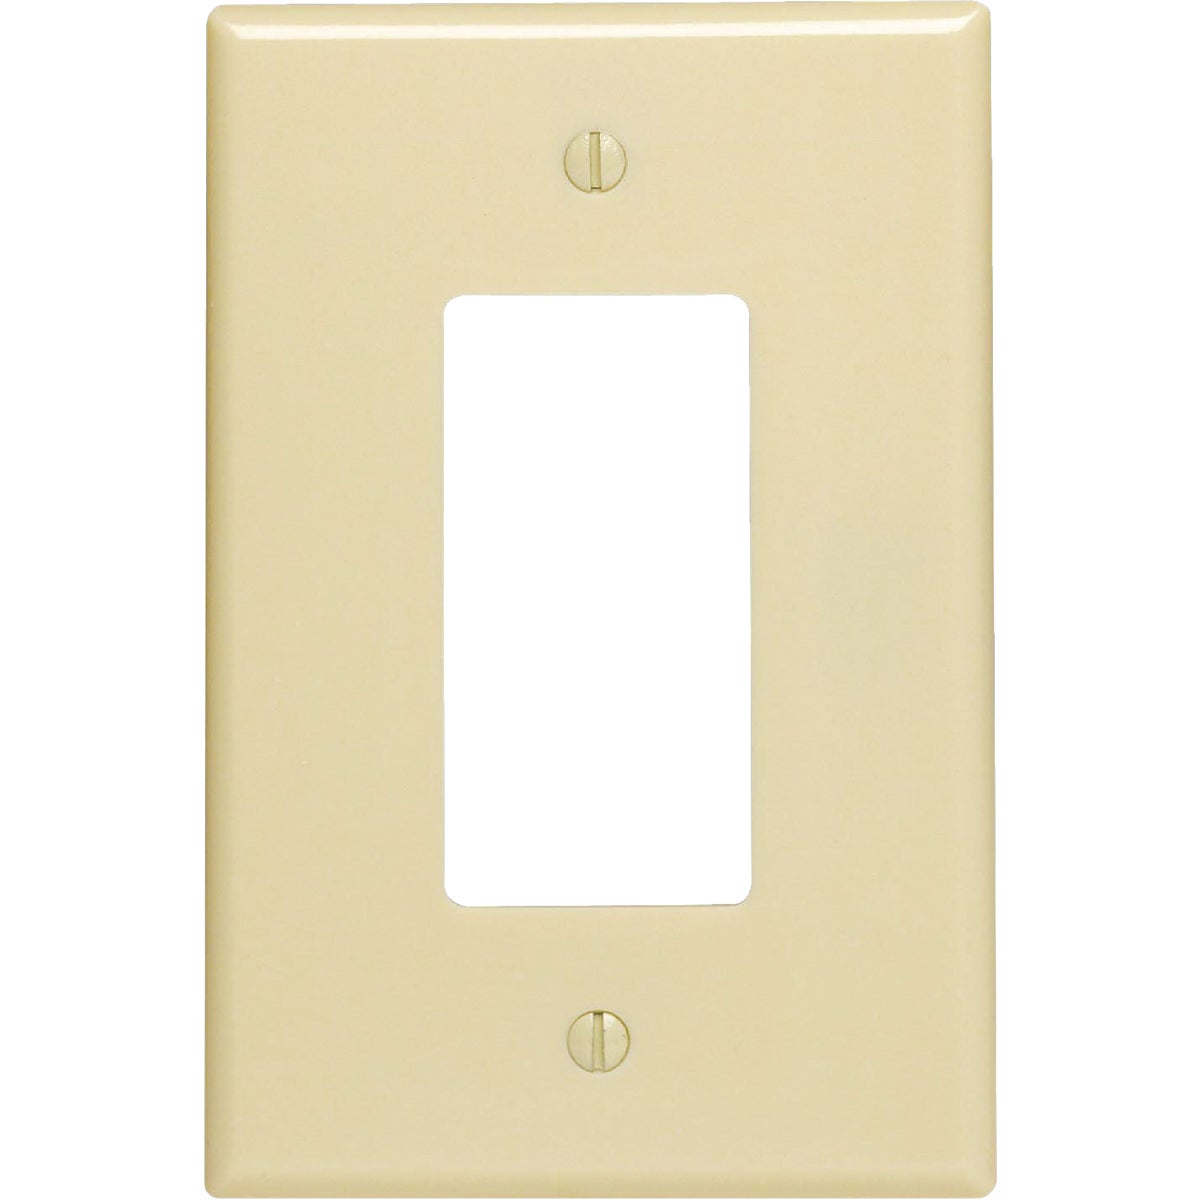 Item 517486, Oversized rocker wall plate provides greater coverage to conceal wall 